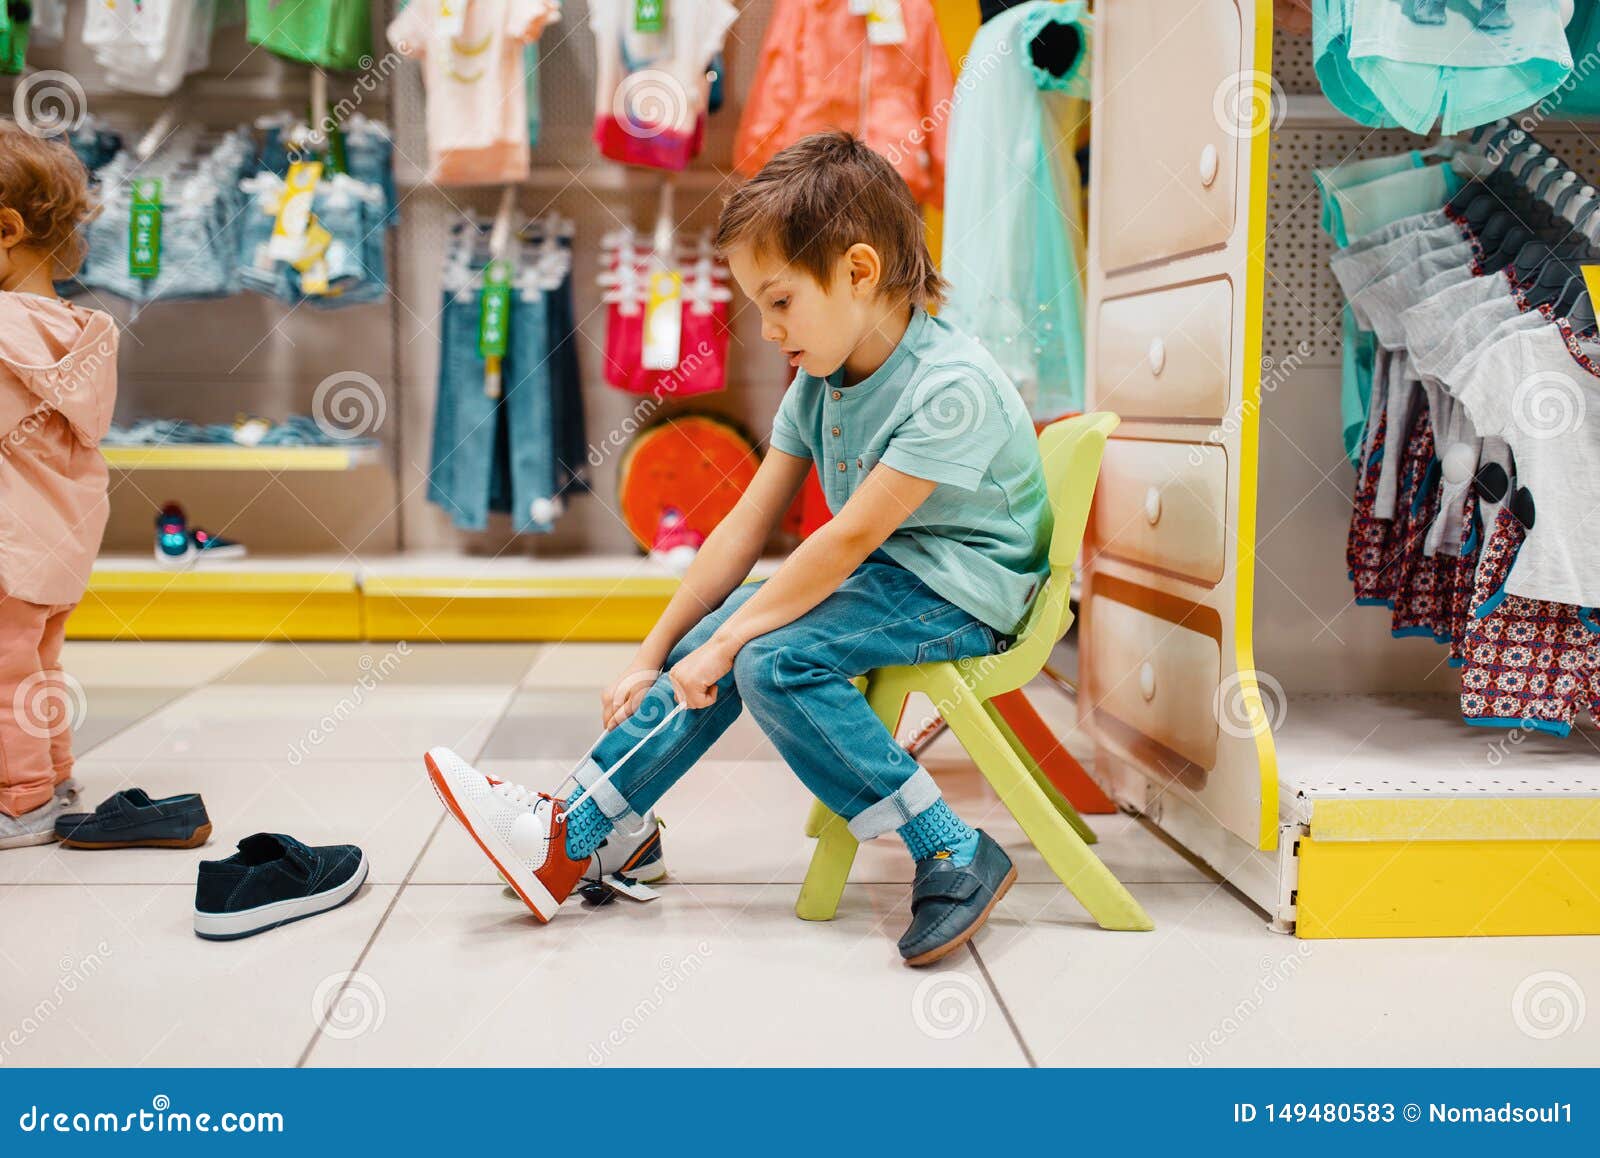 Child putting on his shoes stock image. Image of child 